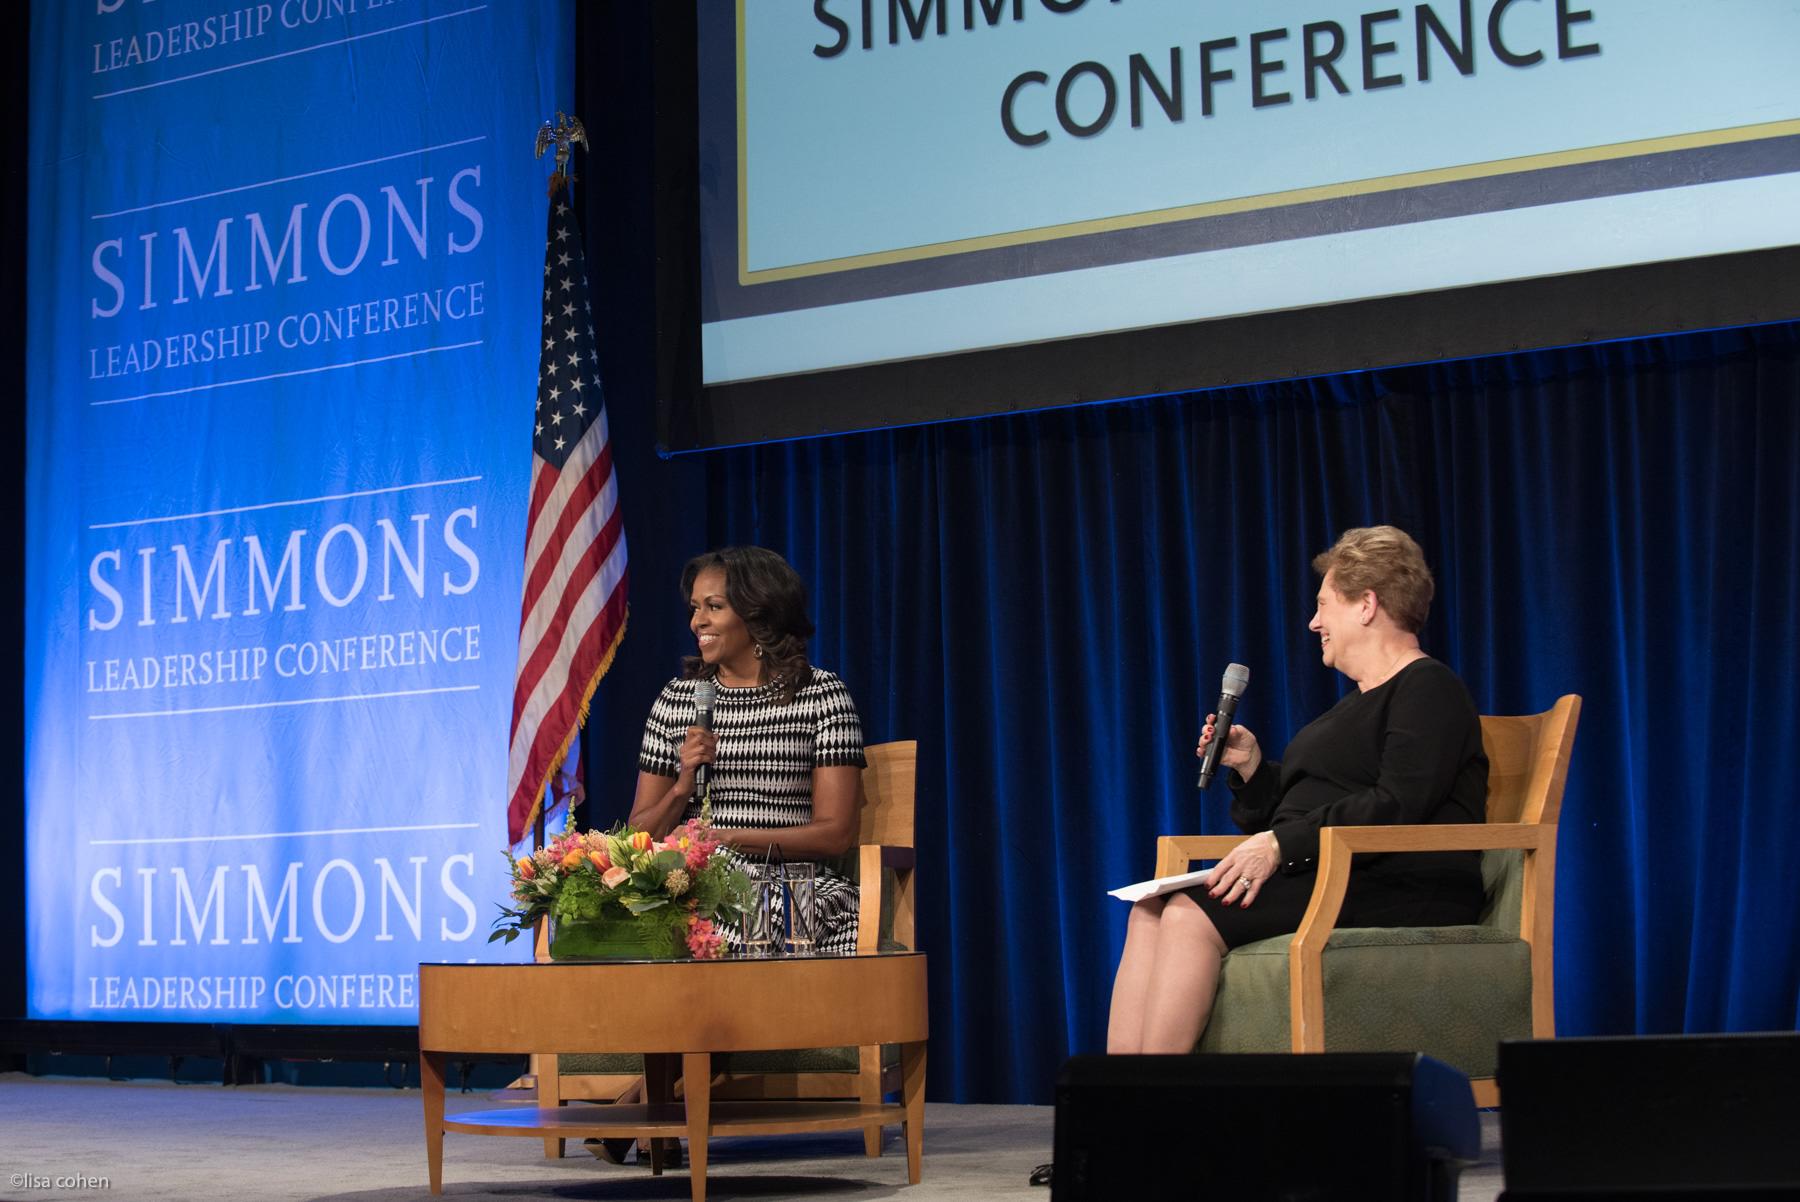 Former First Lady Michelle Obama, a notable speaker at the 2018 Simmons Leadership Conference, spoke with Simmons University President Helen Drinan on stage. Photo: Lisa Cohen